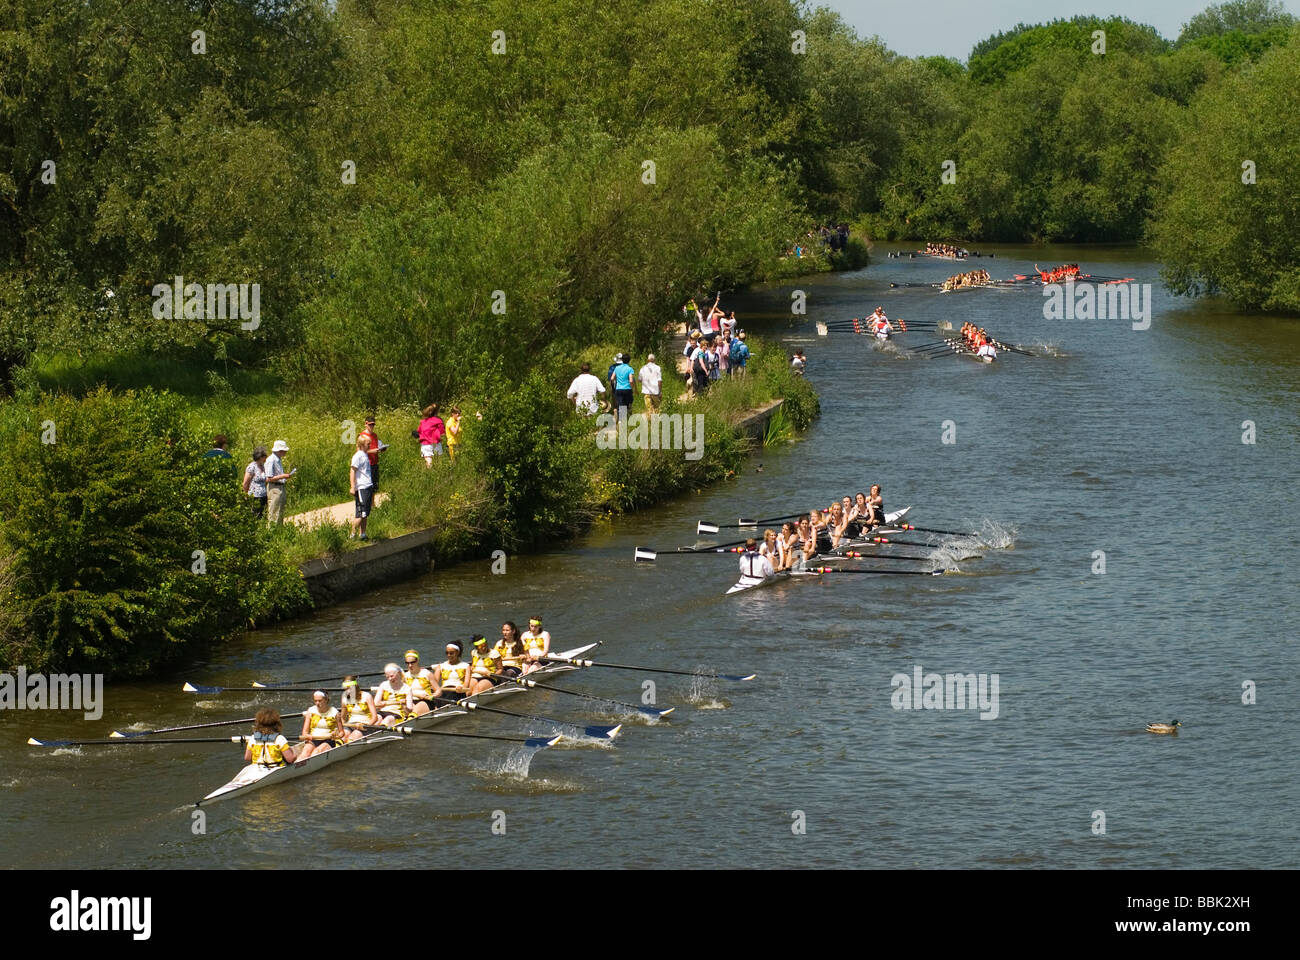 Oxford University Rowing Clubs Eights Week Rowing races on the River Isis actually River Thames in Oxford Oxfordshire 2009 2000s HOMER SYKES Stock Photo